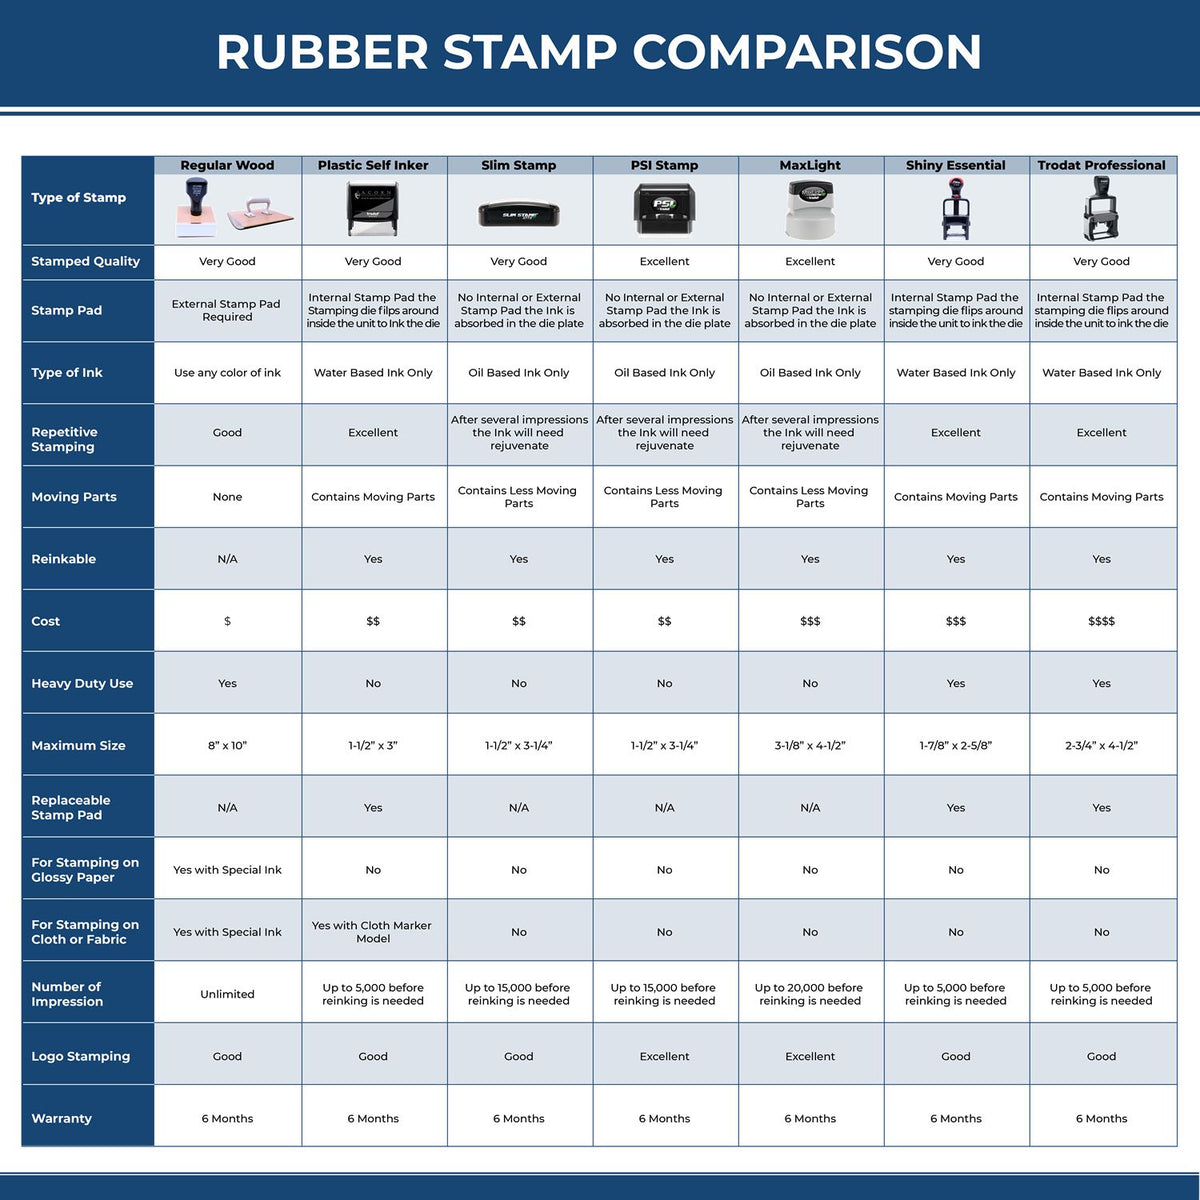 A comparison chart for the different types of mount models available for the Premium MaxLight Pre-Inked North Carolina Landscape Architectural Stamp.